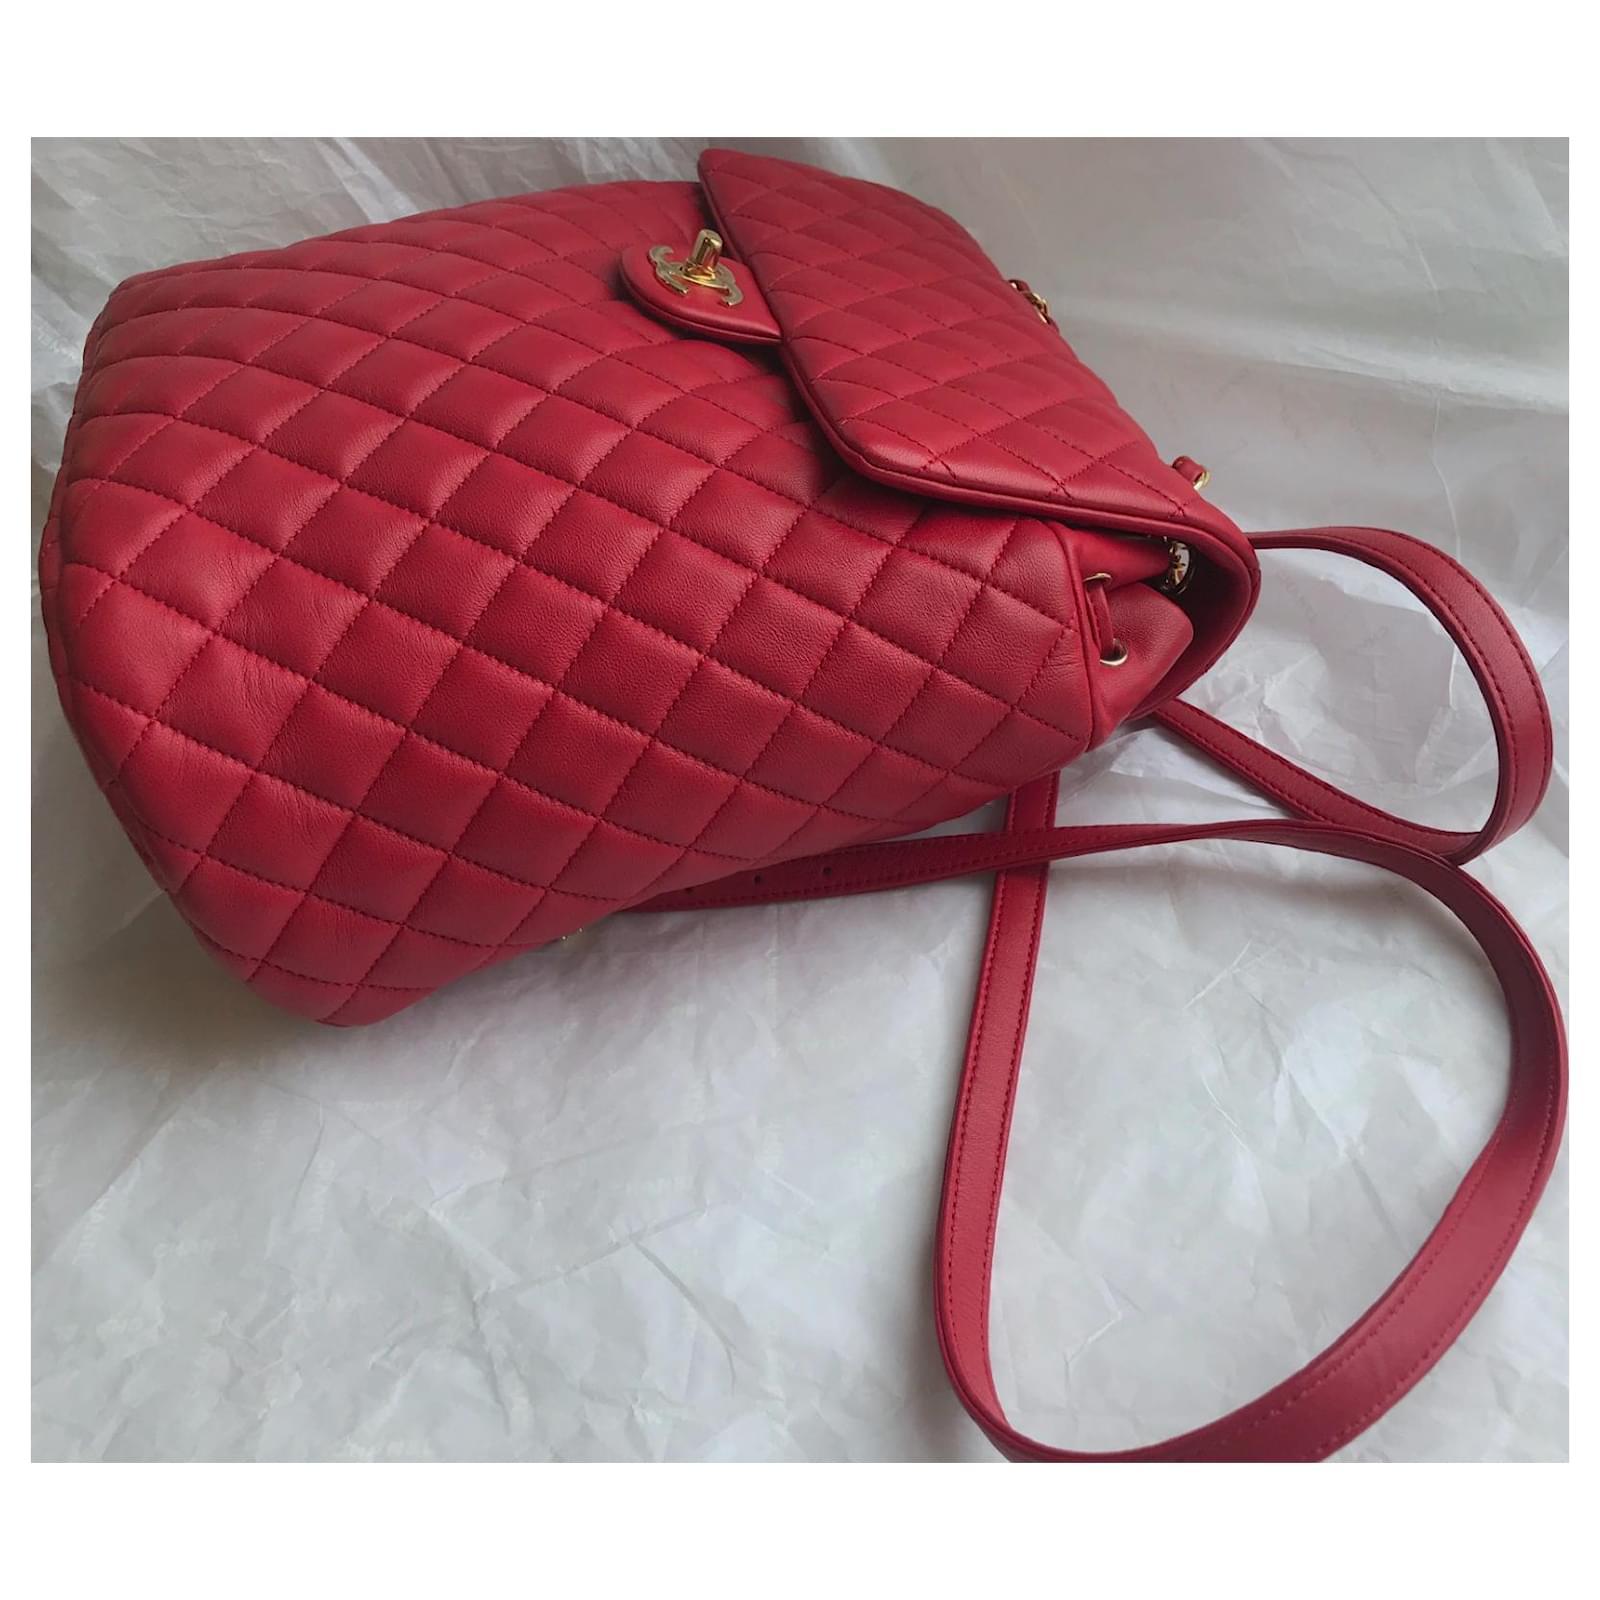 Chanel Red Lambskin Small Backpack